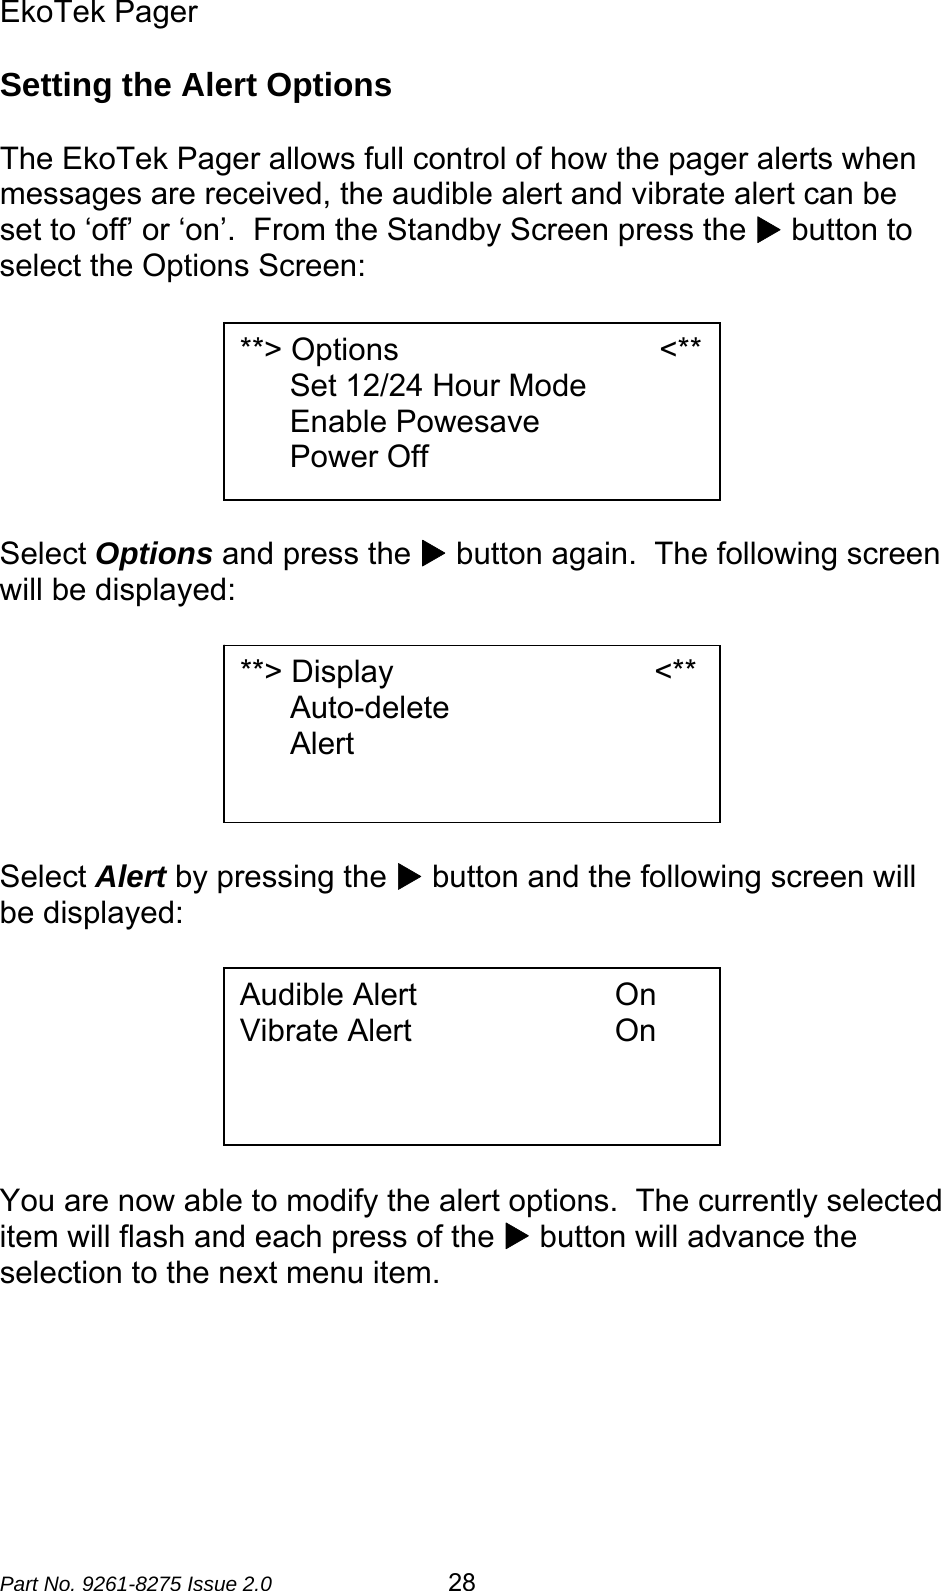 EkoTek Pager  Part No. 9261-8275 Issue 2.0   28 Setting the Alert Options  The EkoTek Pager allows full control of how the pager alerts when messages are received, the audible alert and vibrate alert can be set to ‘off’ or ‘on’.  From the Standby Screen press the X button to select the Options Screen:        Select Options and press the X button again.  The following screen will be displayed:        Select Alert by pressing the X button and the following screen will be displayed:        You are now able to modify the alert options.  The currently selected item will flash and each press of the X button will advance the selection to the next menu item.      **&gt; Options                              &lt;** Set 12/24 Hour Mode Enable Powesave Power Off **&gt; Display                              &lt;** Auto-delete Alert  Audible Alert                     On Vibrate Alert                      On 